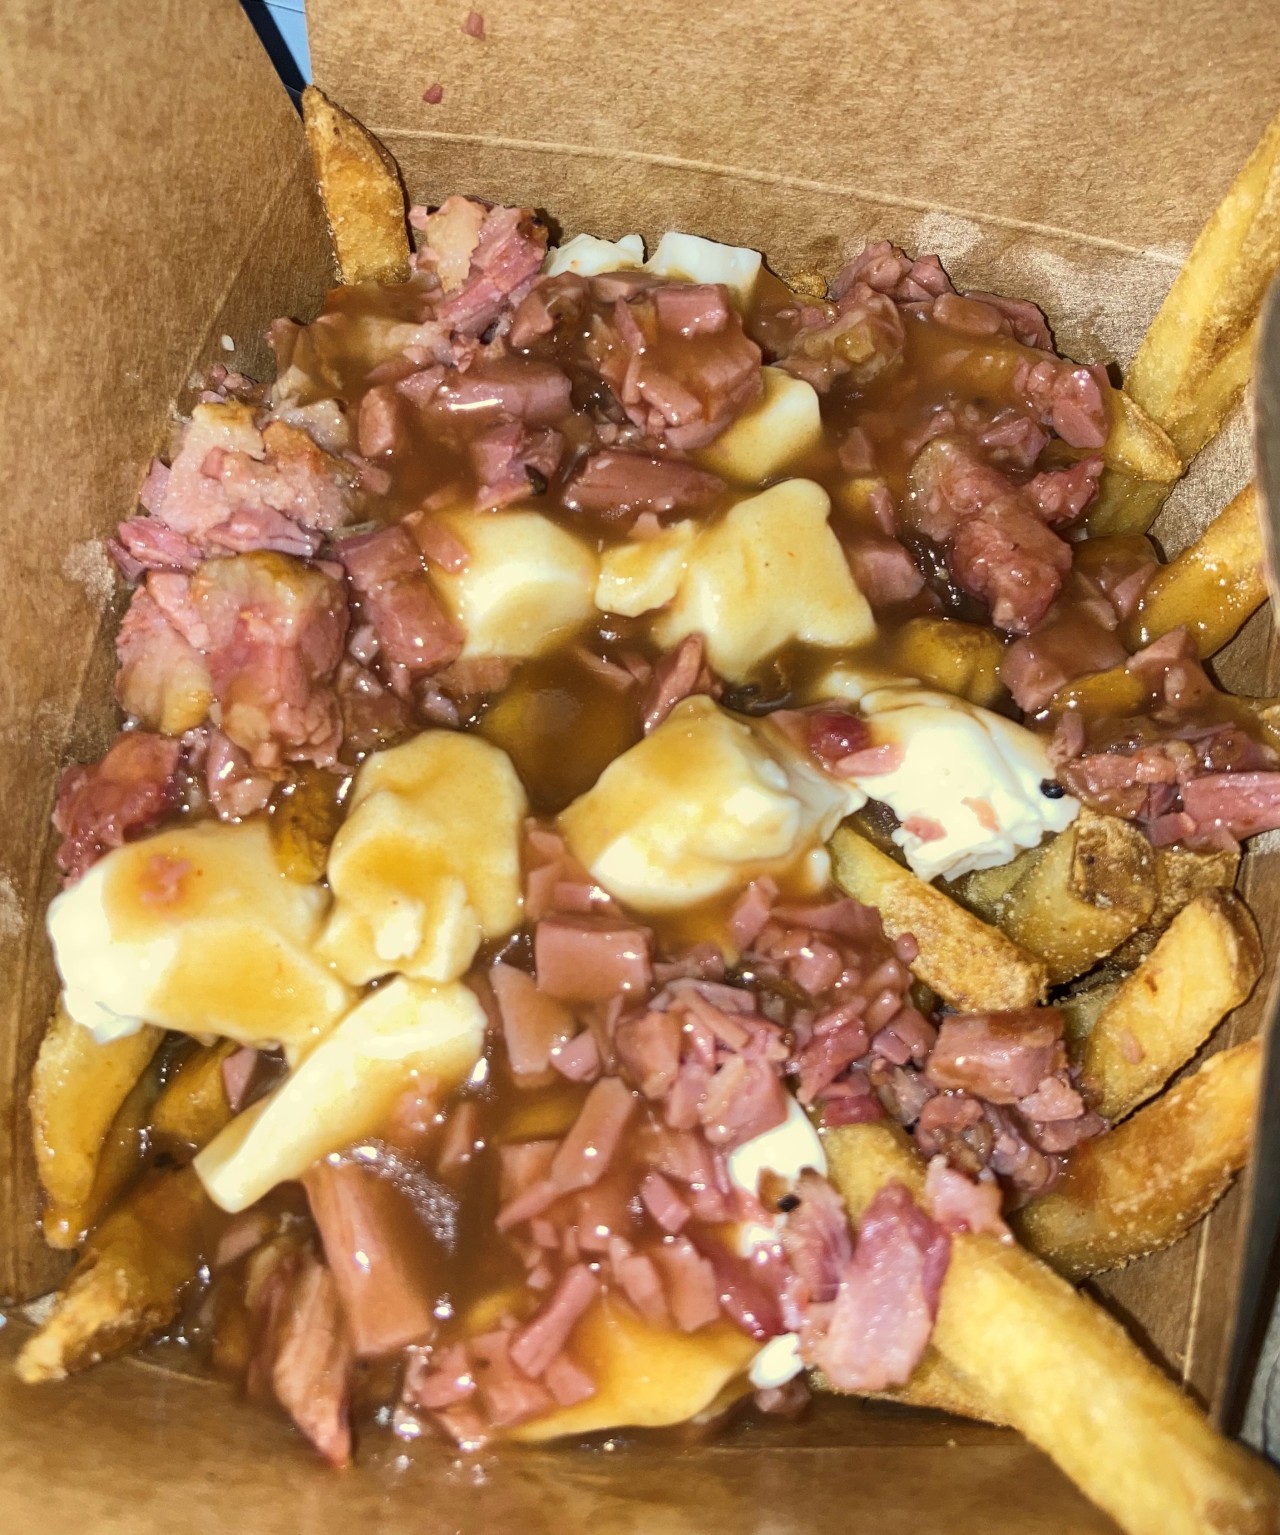 #smoked meat poutine #stadium food#Montreal food#Centre Bell#Montreal#Quebec#Canada